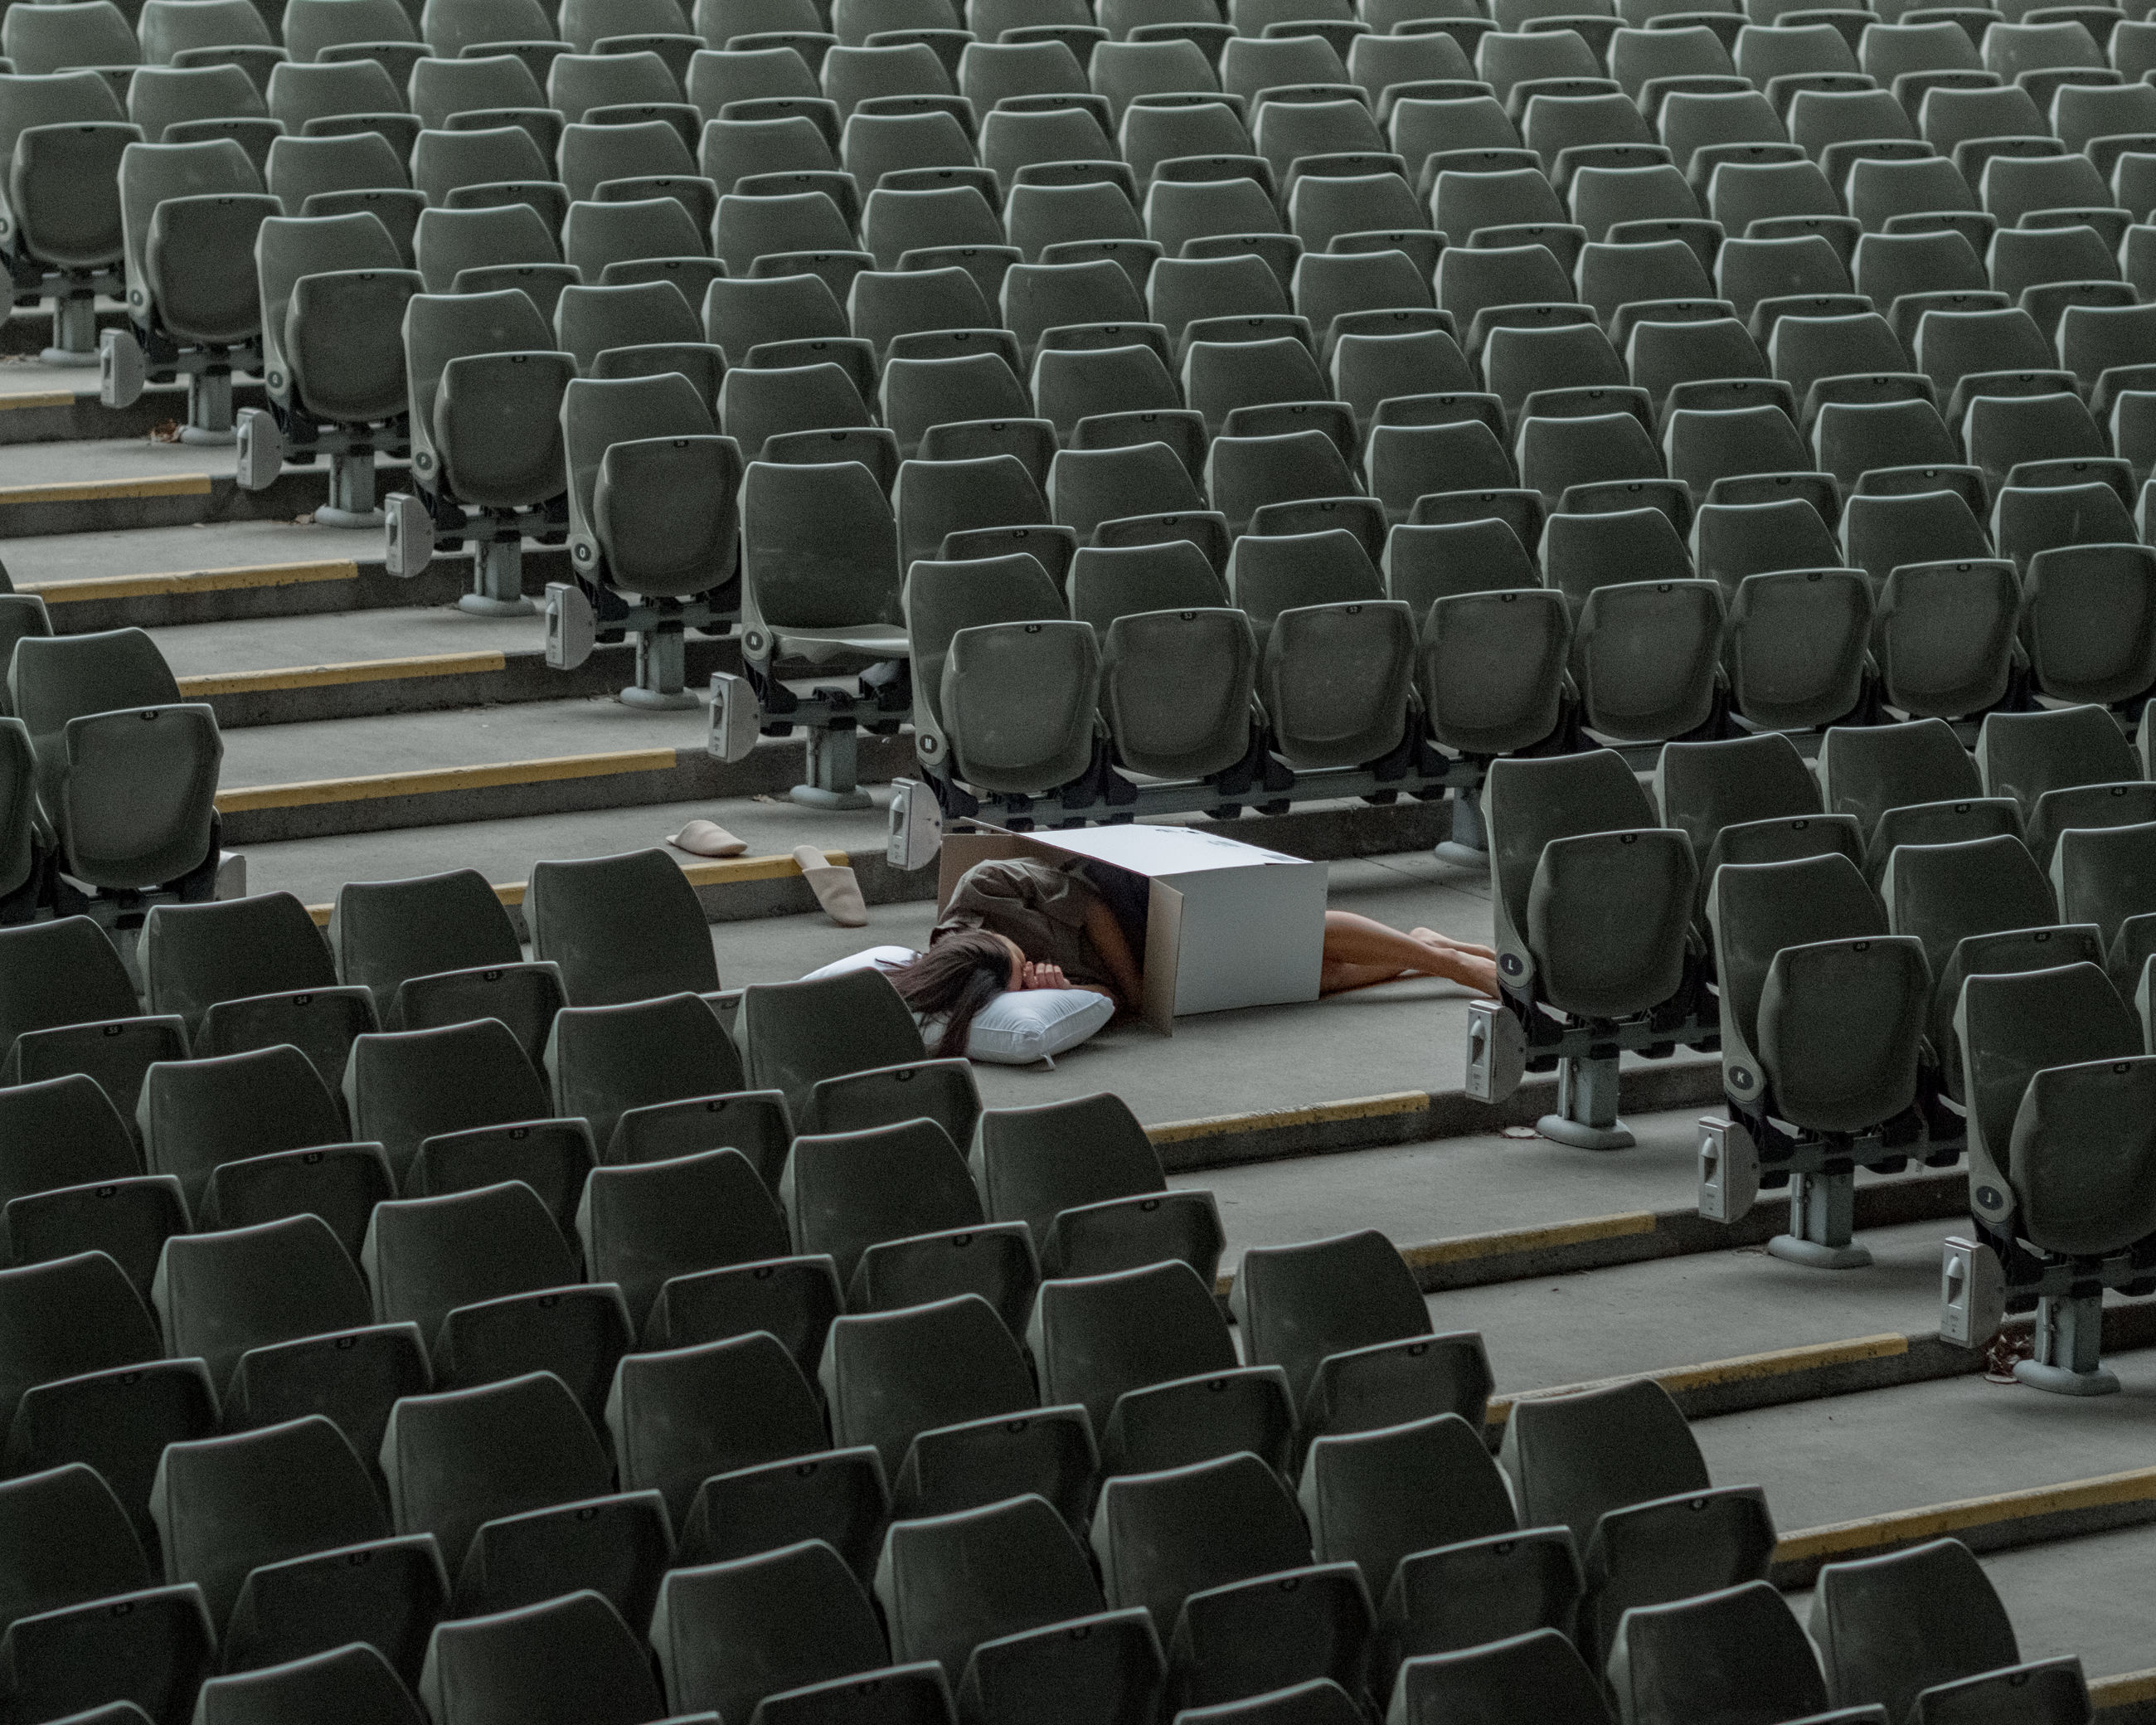 in a row, seat, indoors, large group of objects, repetition, no people, lecture hall, high angle view, school, chair, order, absence, auditorium, arrangement, abundance, arts culture and entertainment, university, technology, architecture